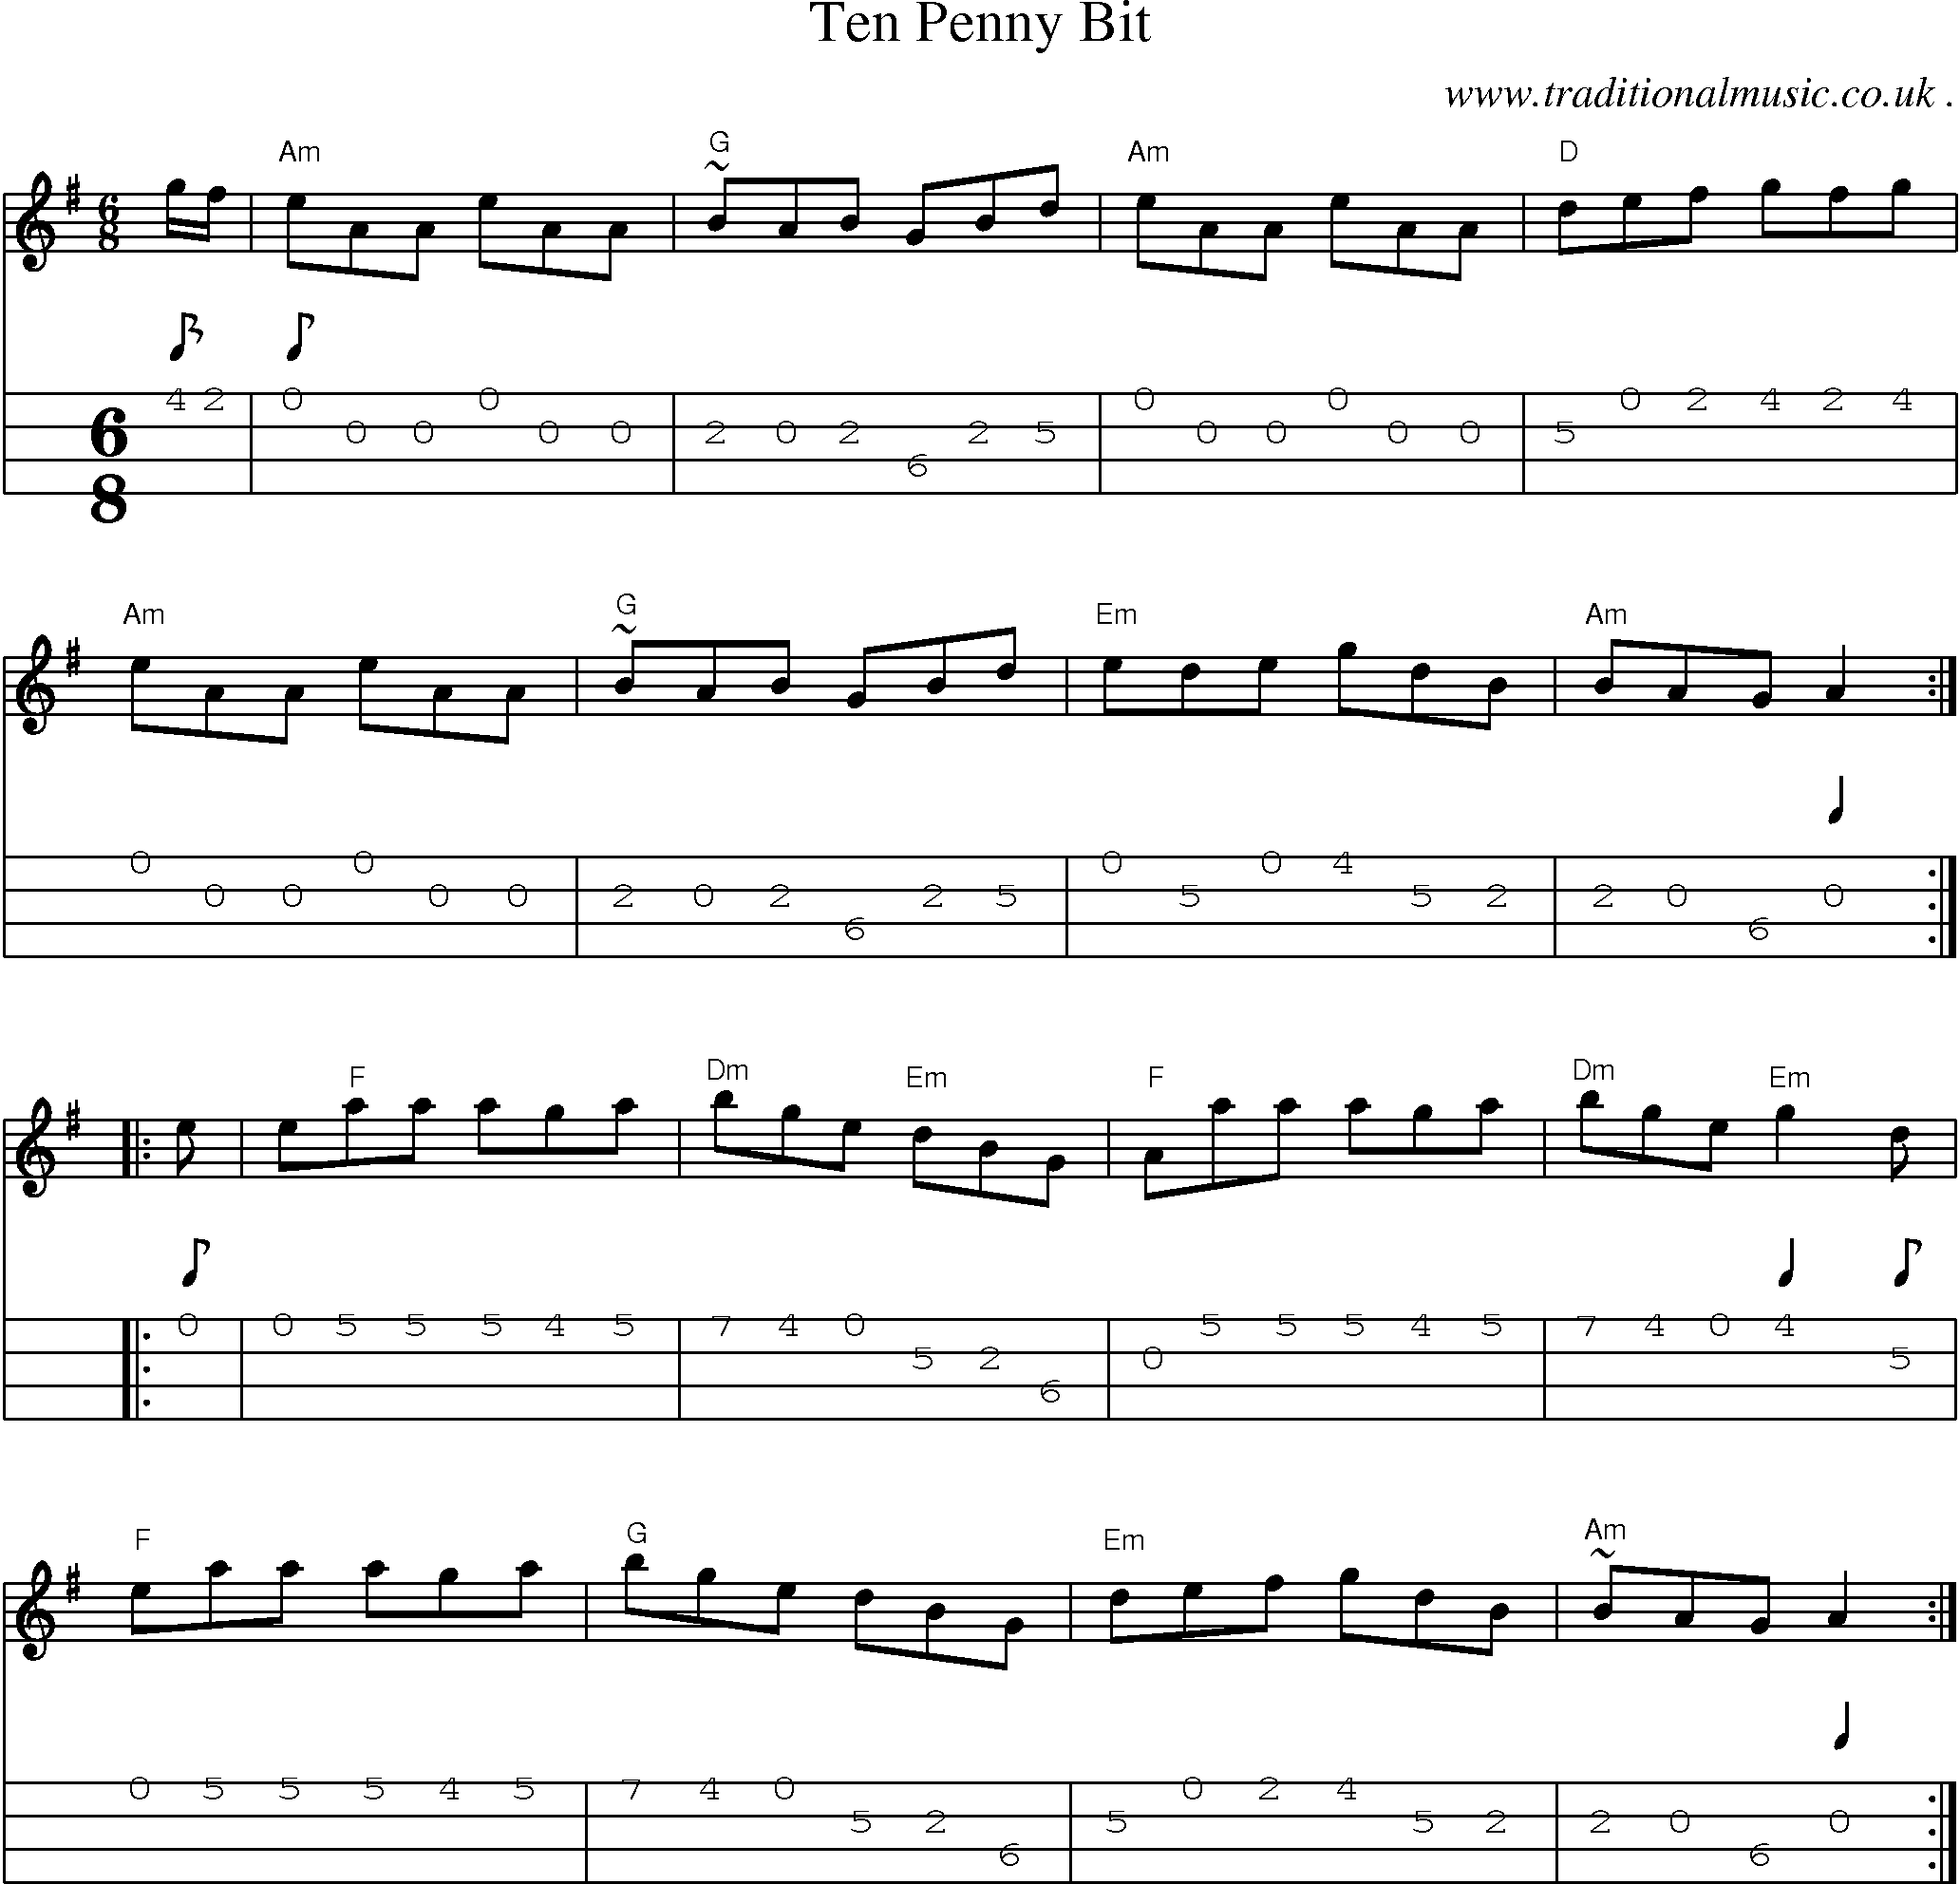 Music Score and Guitar Tabs for Ten Penny Bit